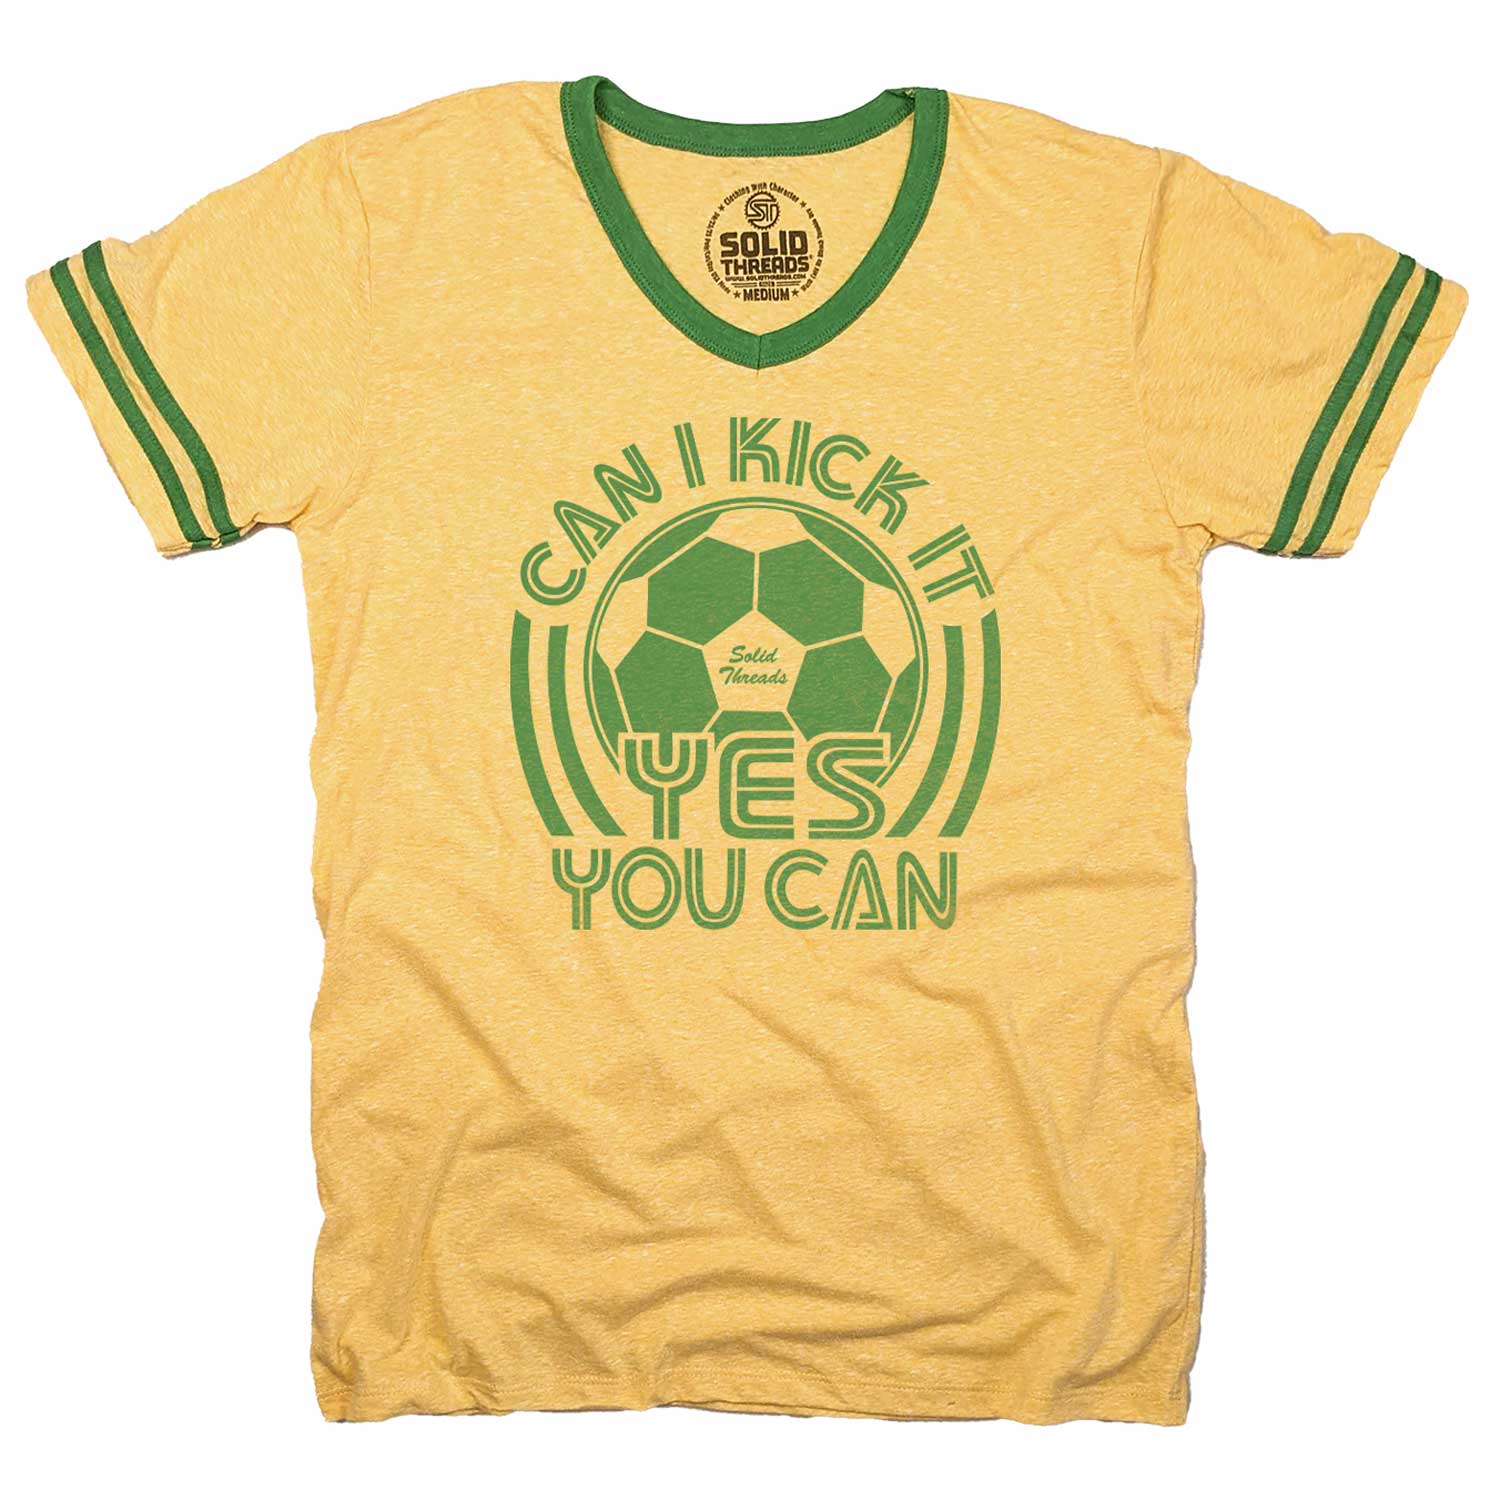 Men's Can I Kick It, Yes You Can Vintage Graphic V-Neck Tee | Funny Soccer T-shirt | Solid Threads